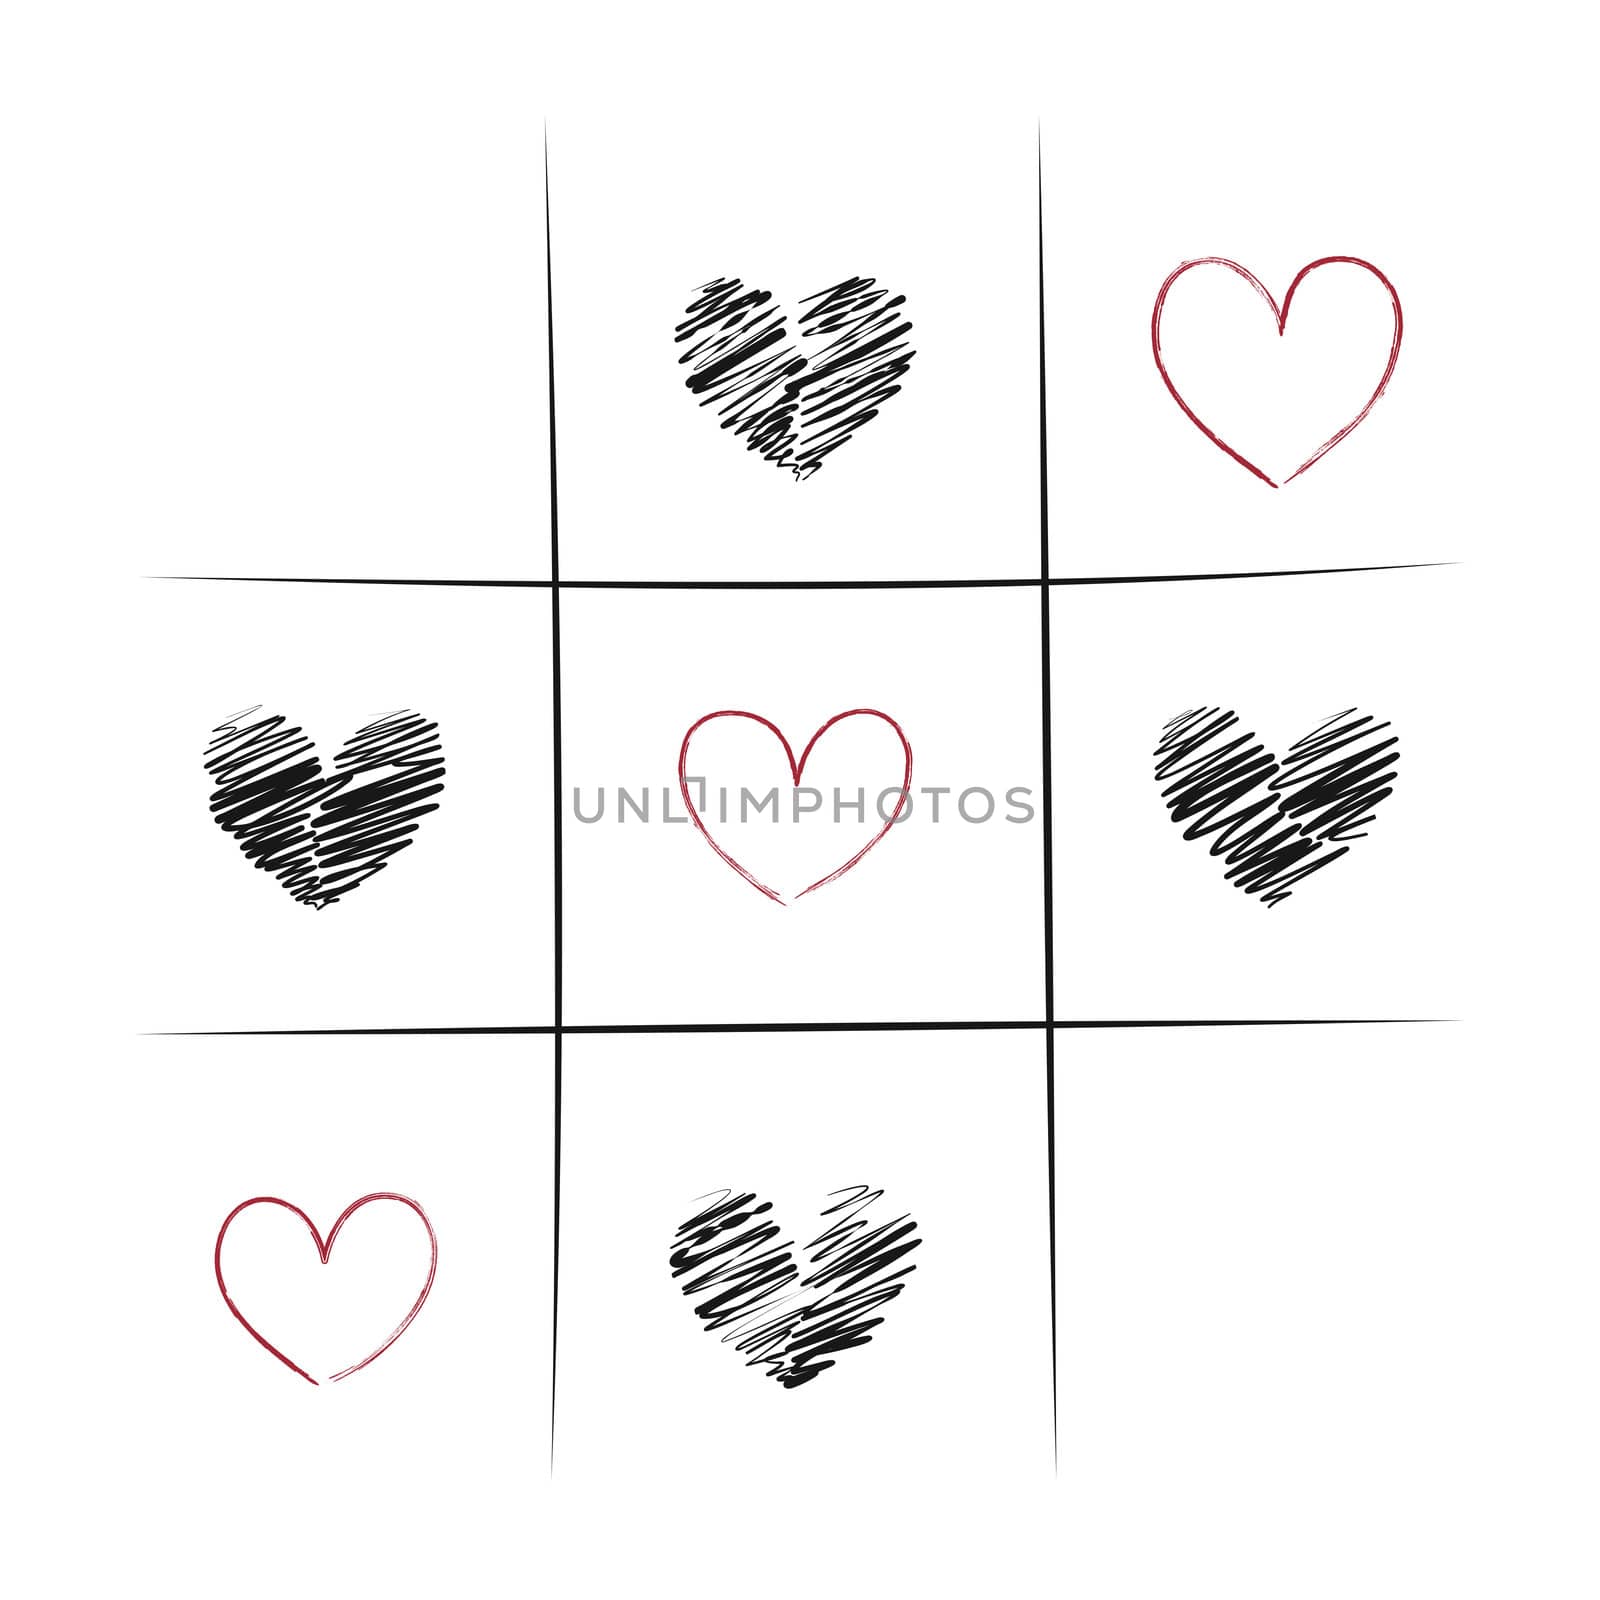 Tic-Tac-Toe Game With Hearts Illustration